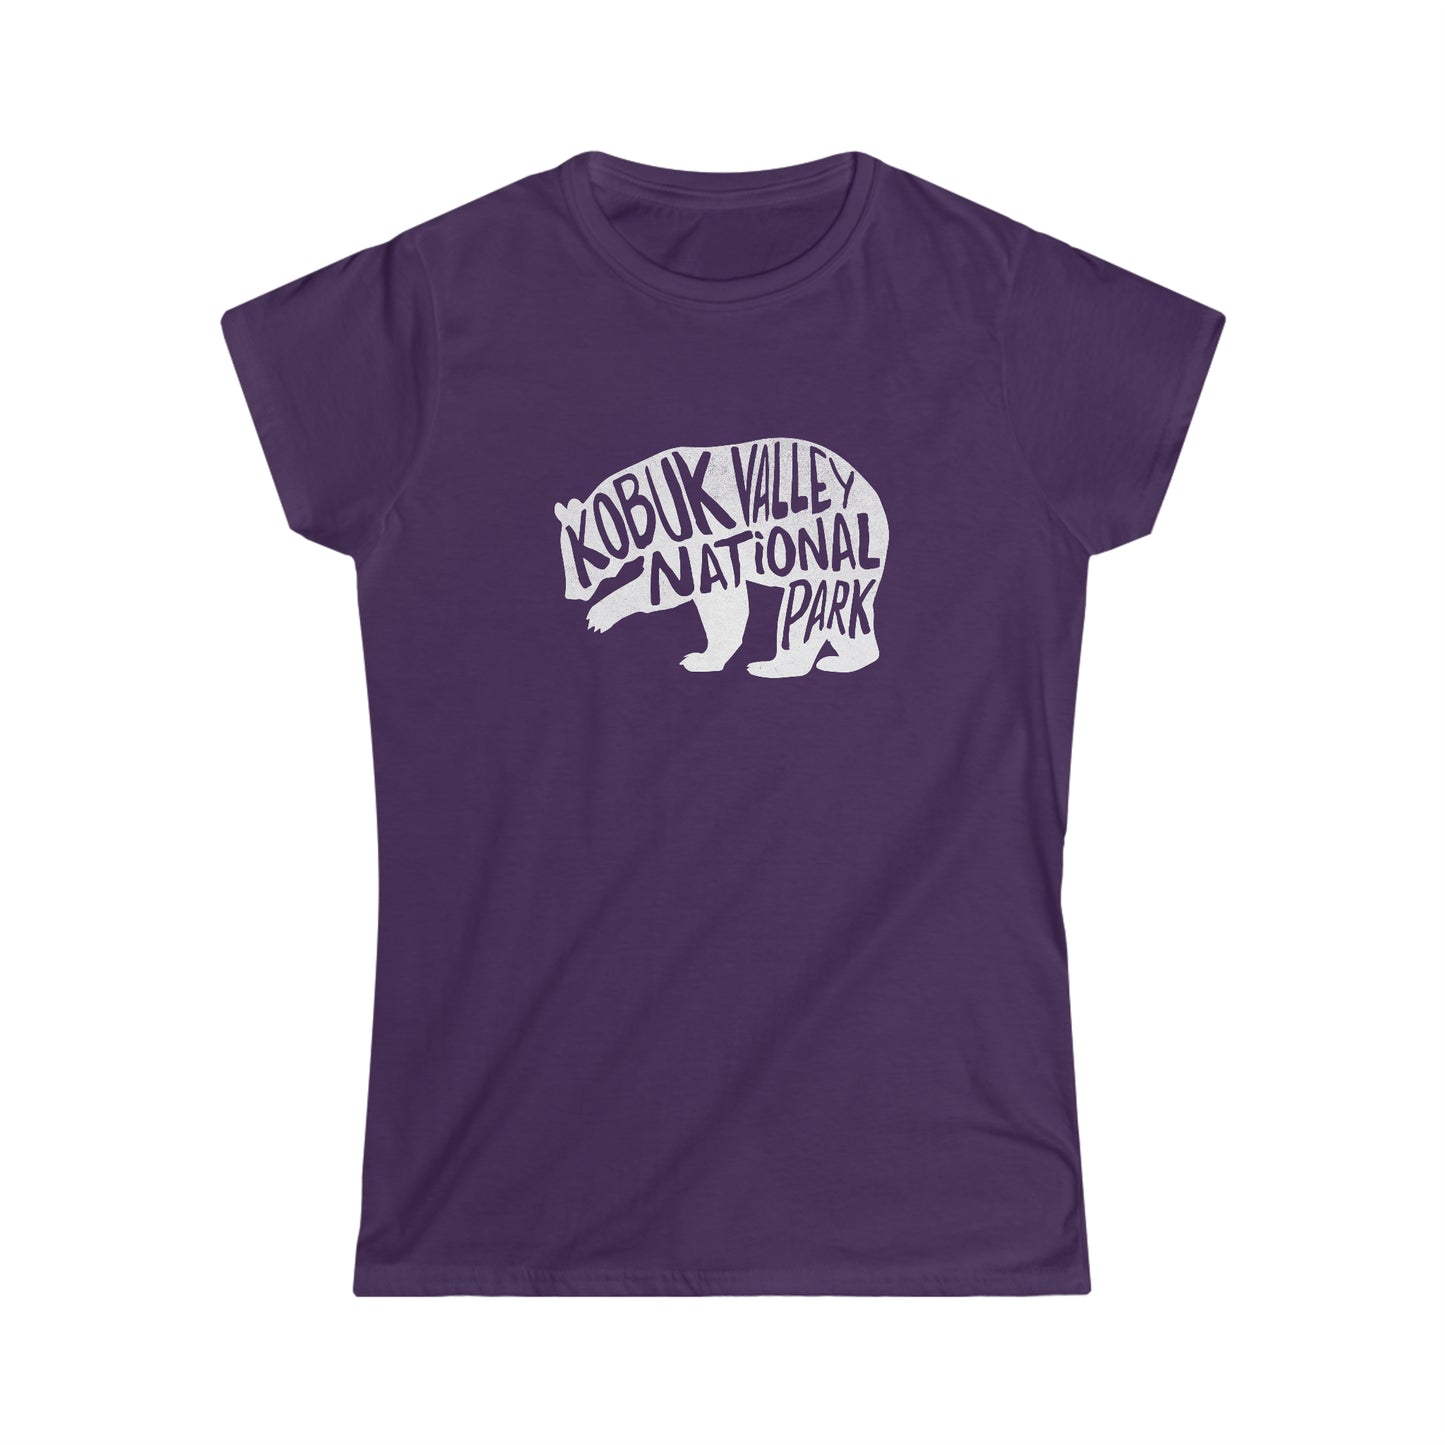 Kobuk Valley National Park Women's T-Shirt - Grizzly Bear